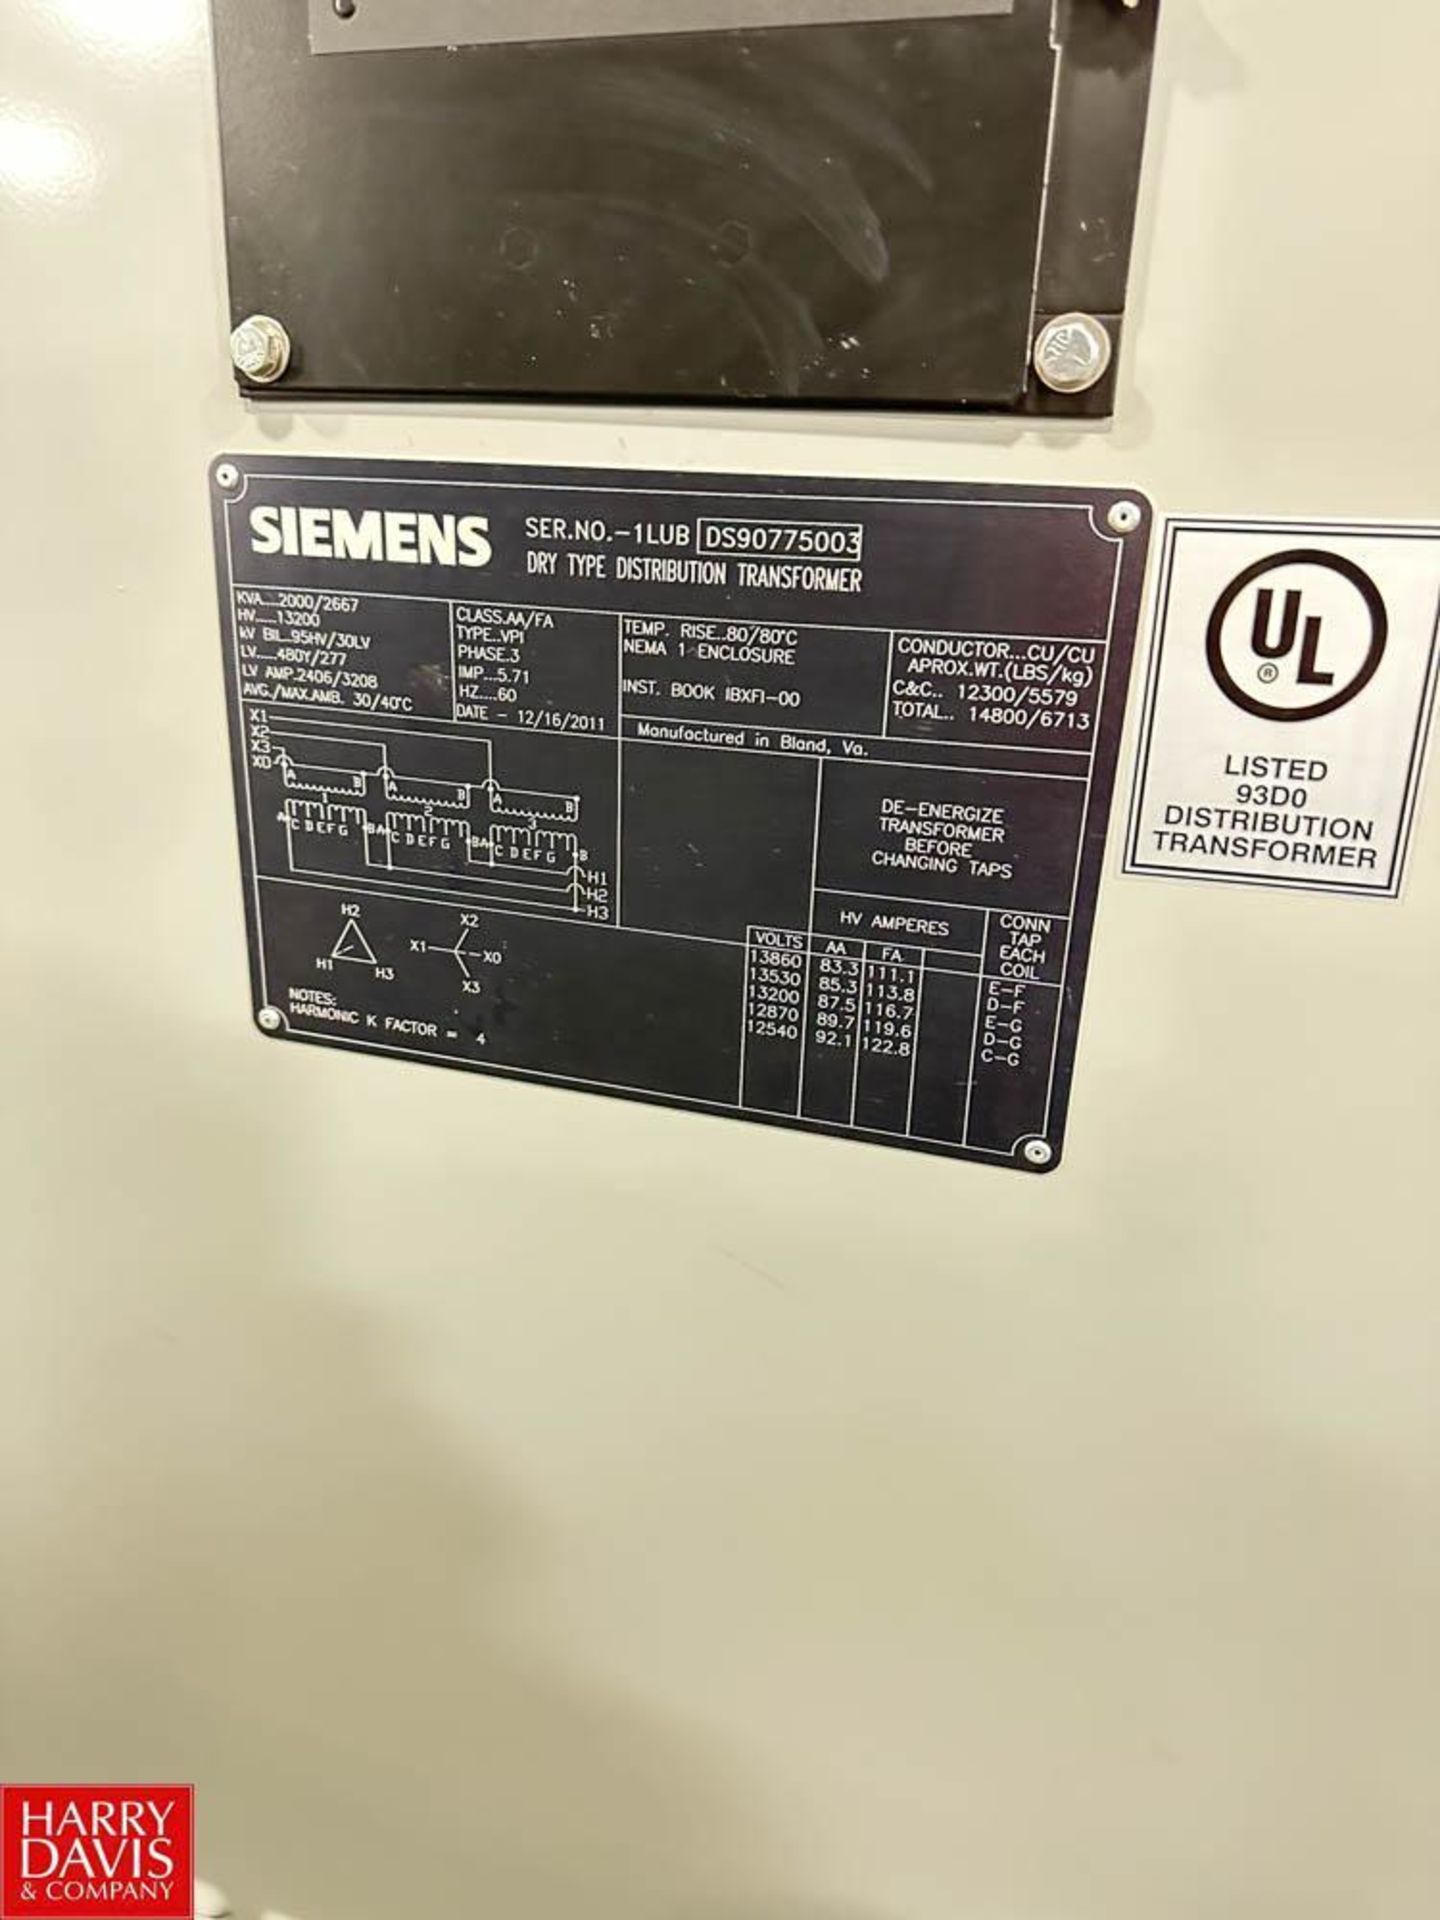 Siemens 2,000/2,667 kVA, Dry-Type Distribution Transformer, Type: VP1, 480Y/277 Volts and 2,406/3,20 - Image 2 of 2